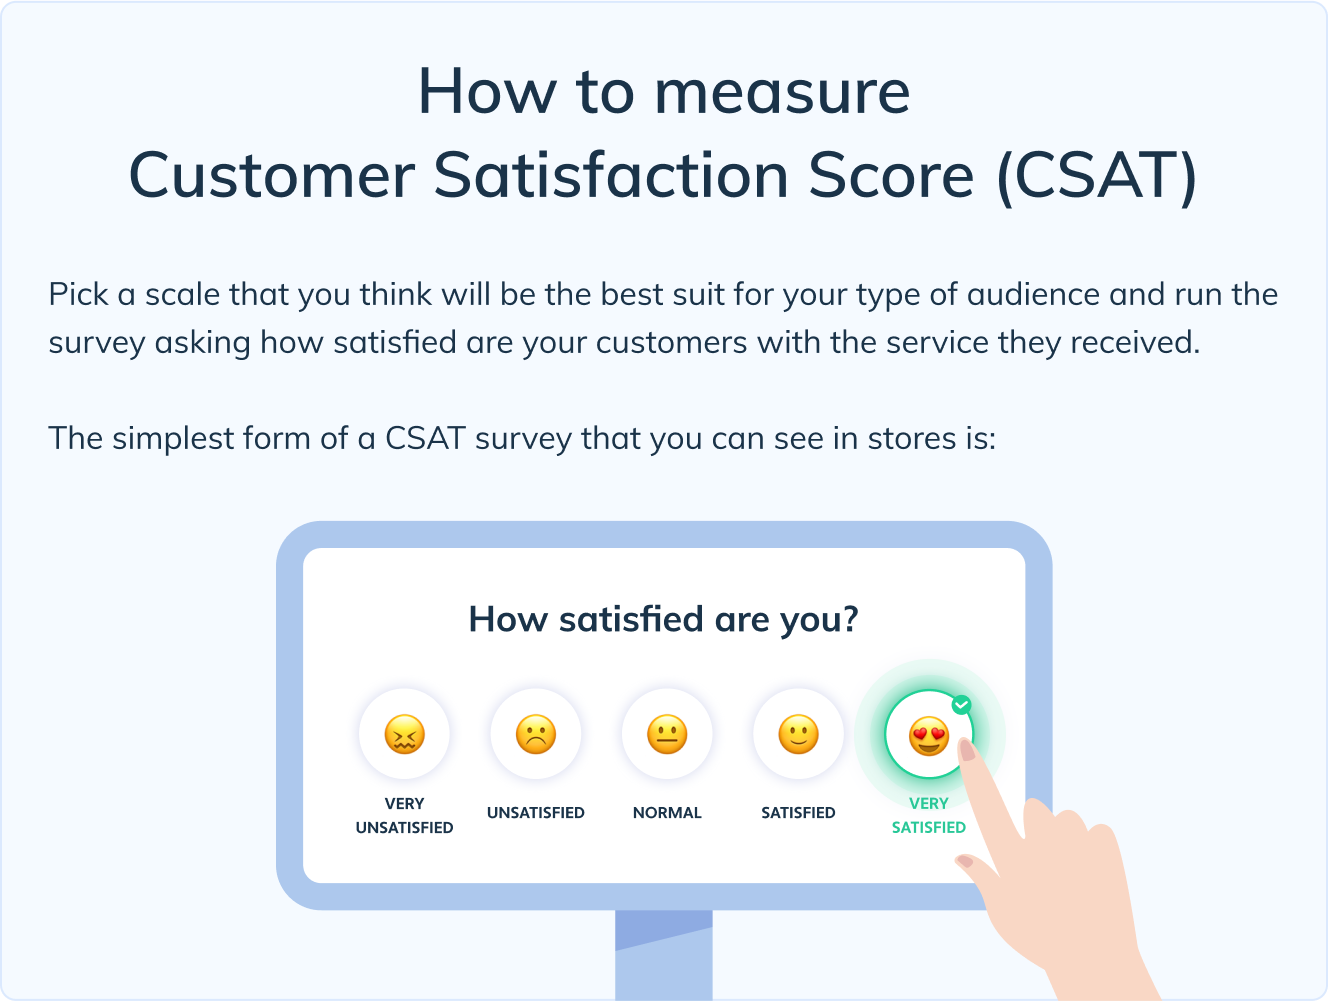 How to measure CSAT